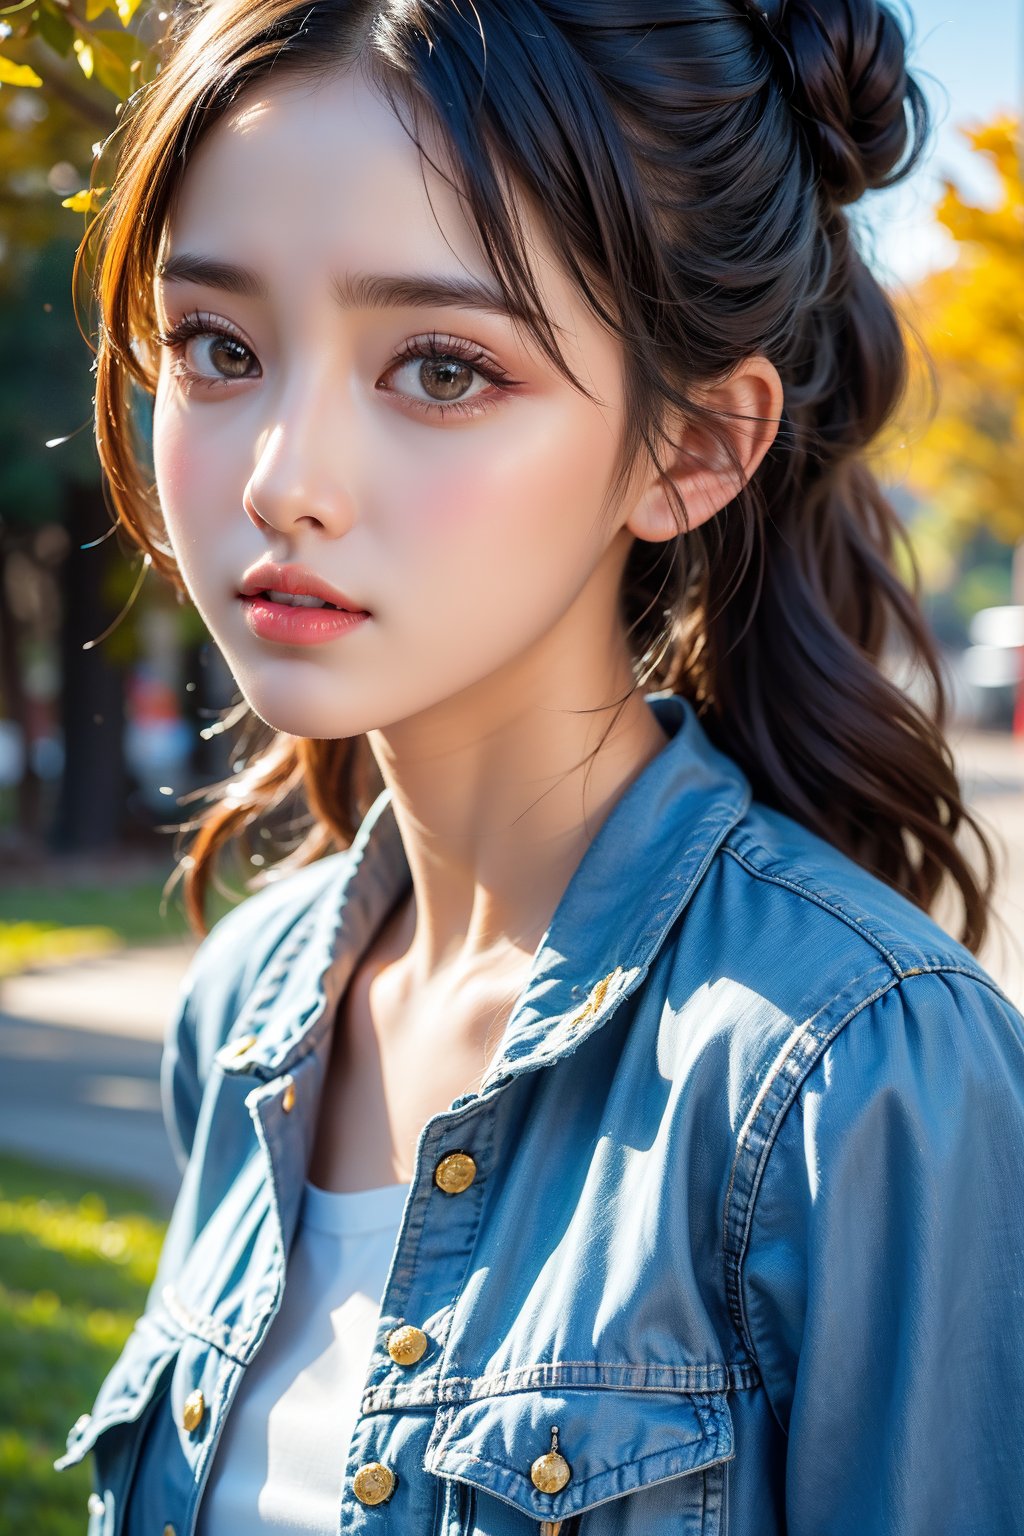 8k, (masterpiece:1.3), ultra-realistic, UHD, highly detailed, best quality, 1girl, petite, distant short, full_body, close up portrait of self-assurance (AIDA_LoRA_HanF:1.1) as (12 years old girl:1.1) standing in the park, (wearing denim jacket:1.1), beautiful realistic girl, cute girl, skinny, slim, fitness, natural hair, dynamic pose, cinematic, dramatic, hyper realistic, studio photo, hdr, f1.6, getty images, (colorful:1.1),perfect light,beauty,Beauty